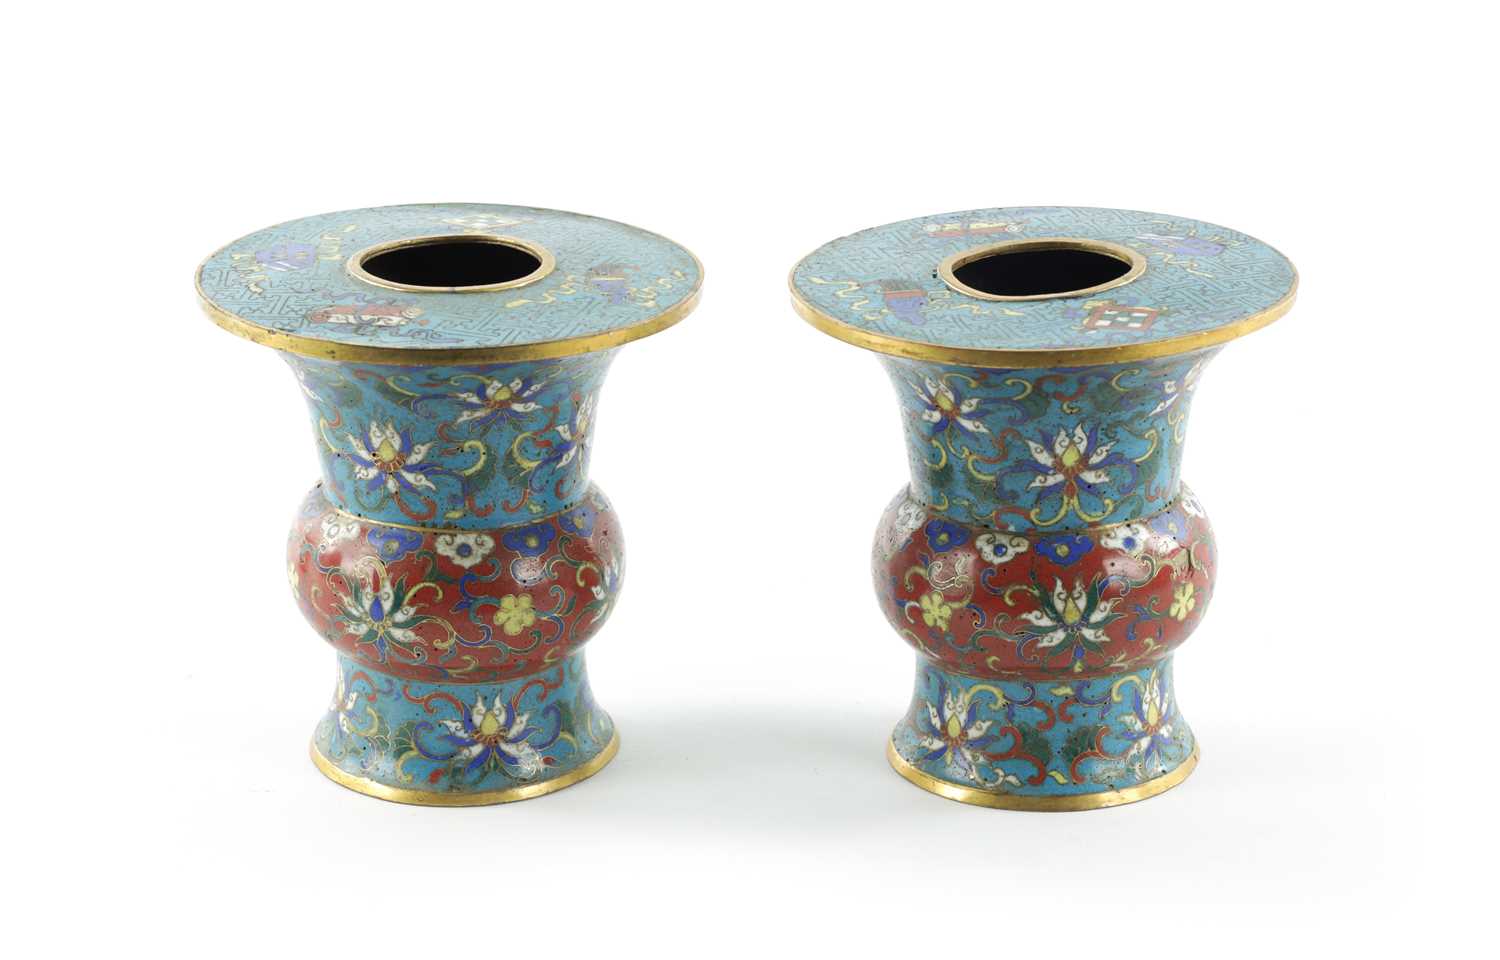 A PAIR OF 18TH CENTURY CHINESE CLOISONNÉ BRUSH POTS